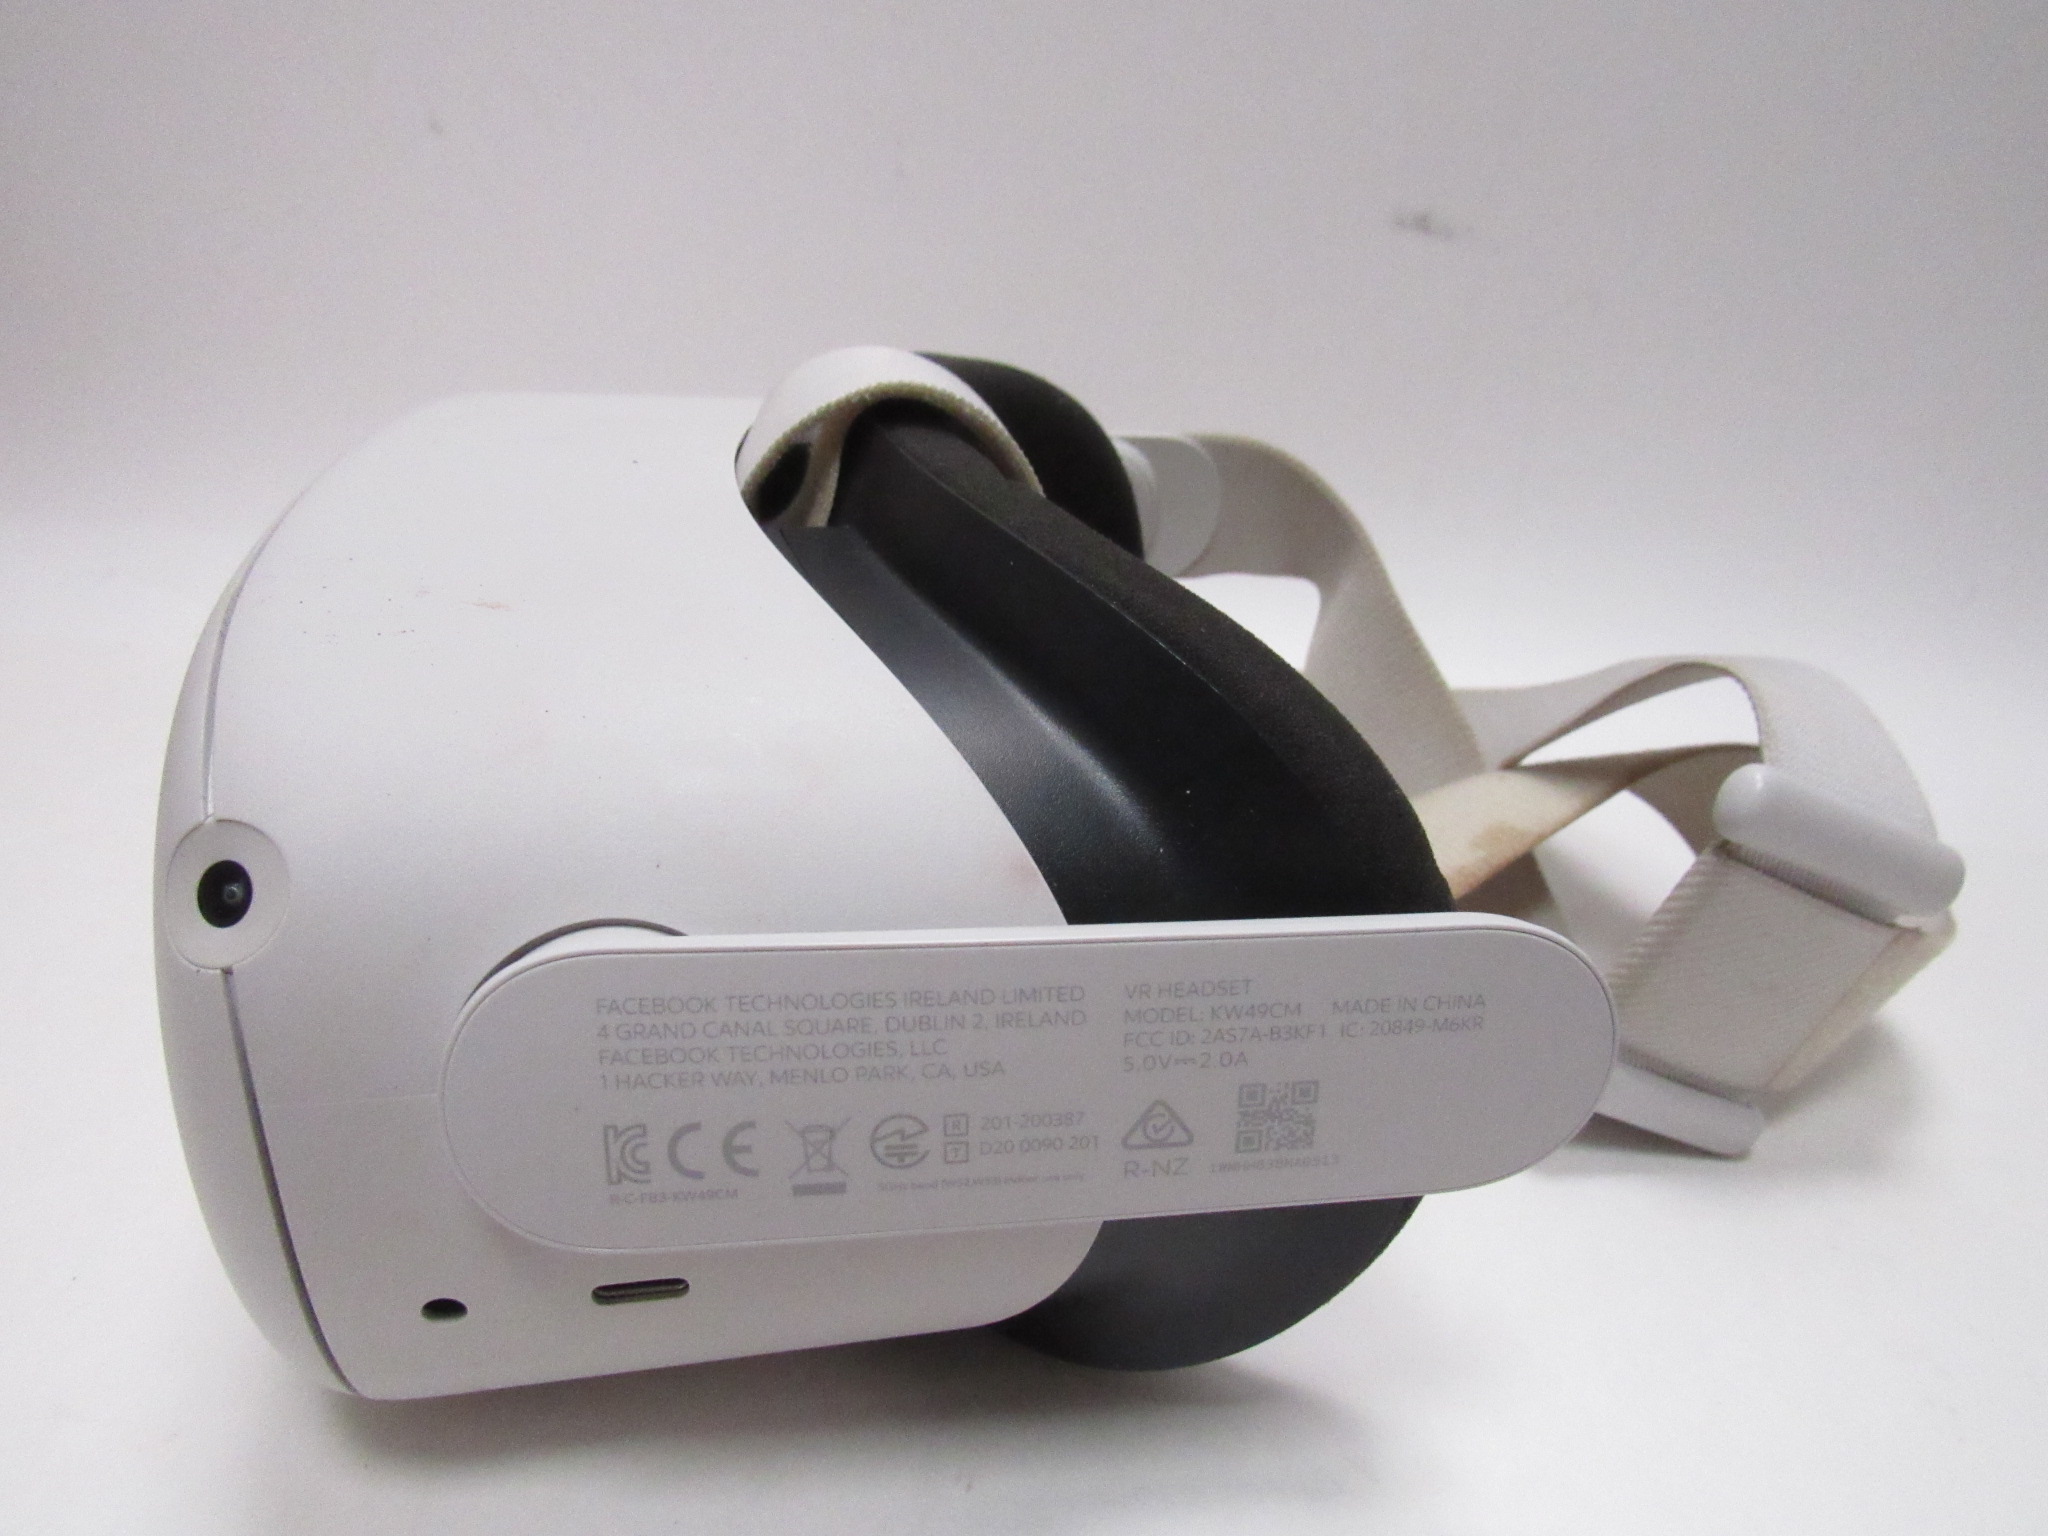 Glat At læse grim Oculus KW49CM 64GB All-in-One VR Headset Quest 2